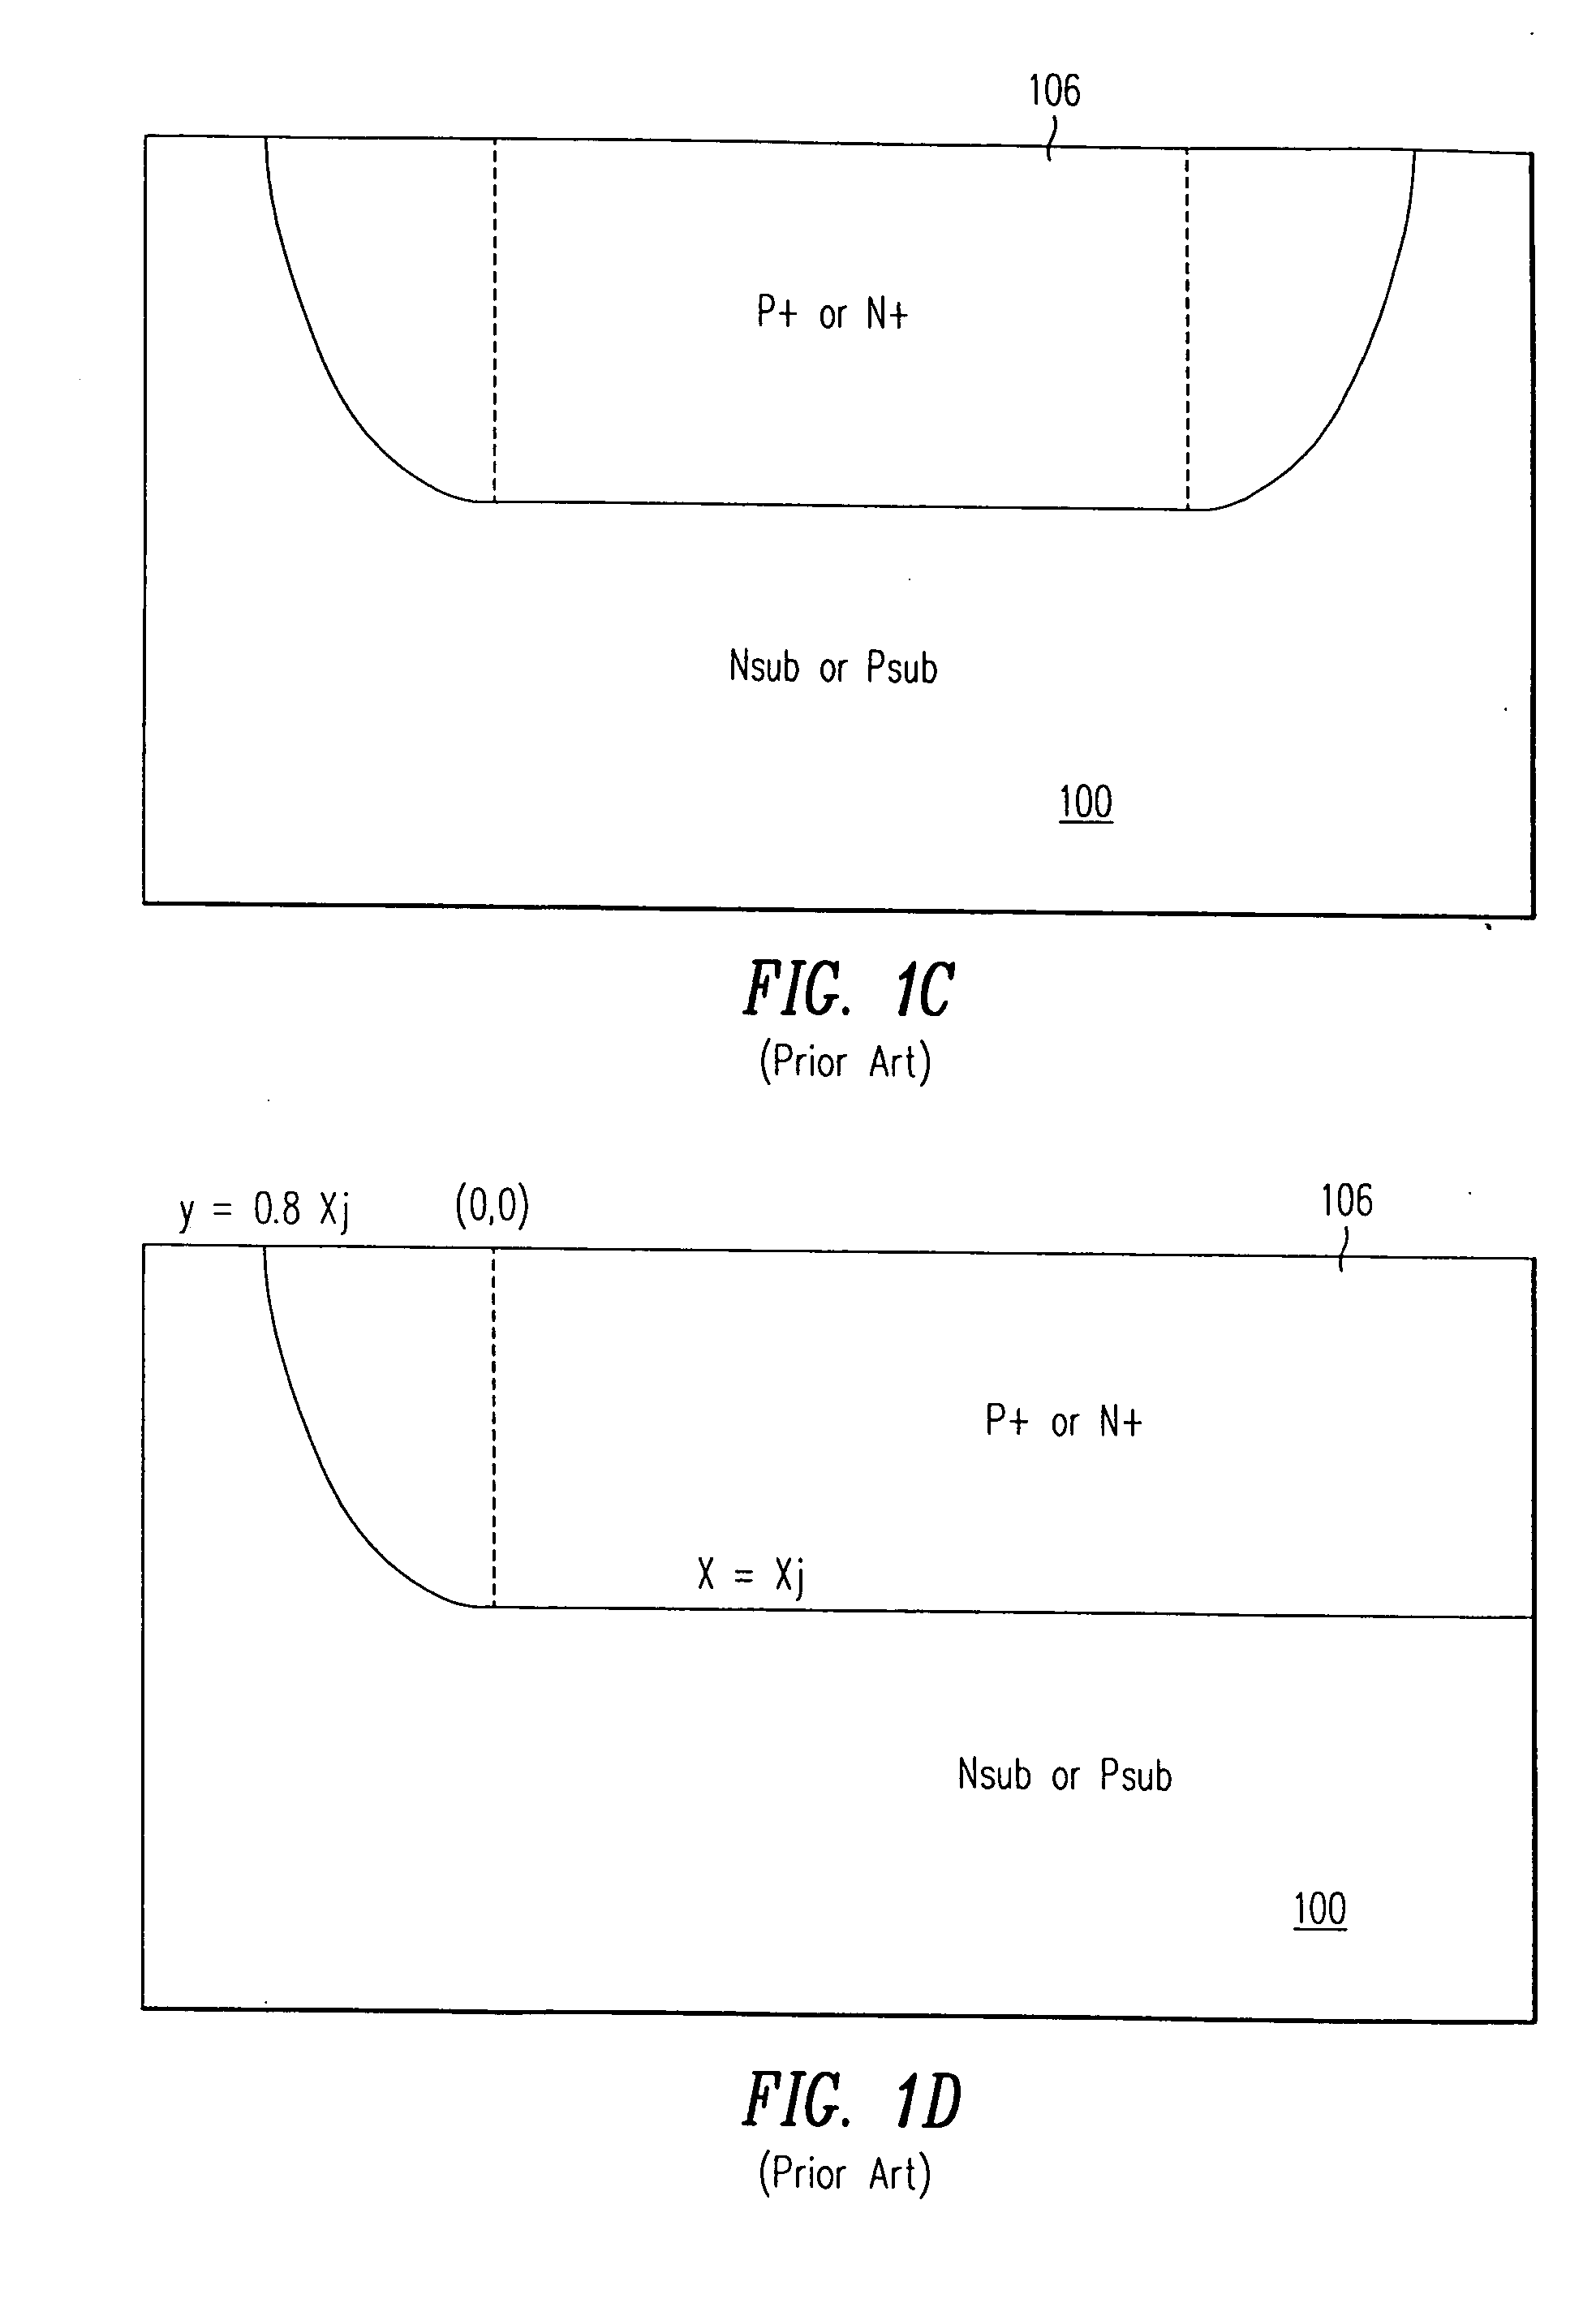 Complementary analog bipolar transistors with trench-constrained isolation diffusion